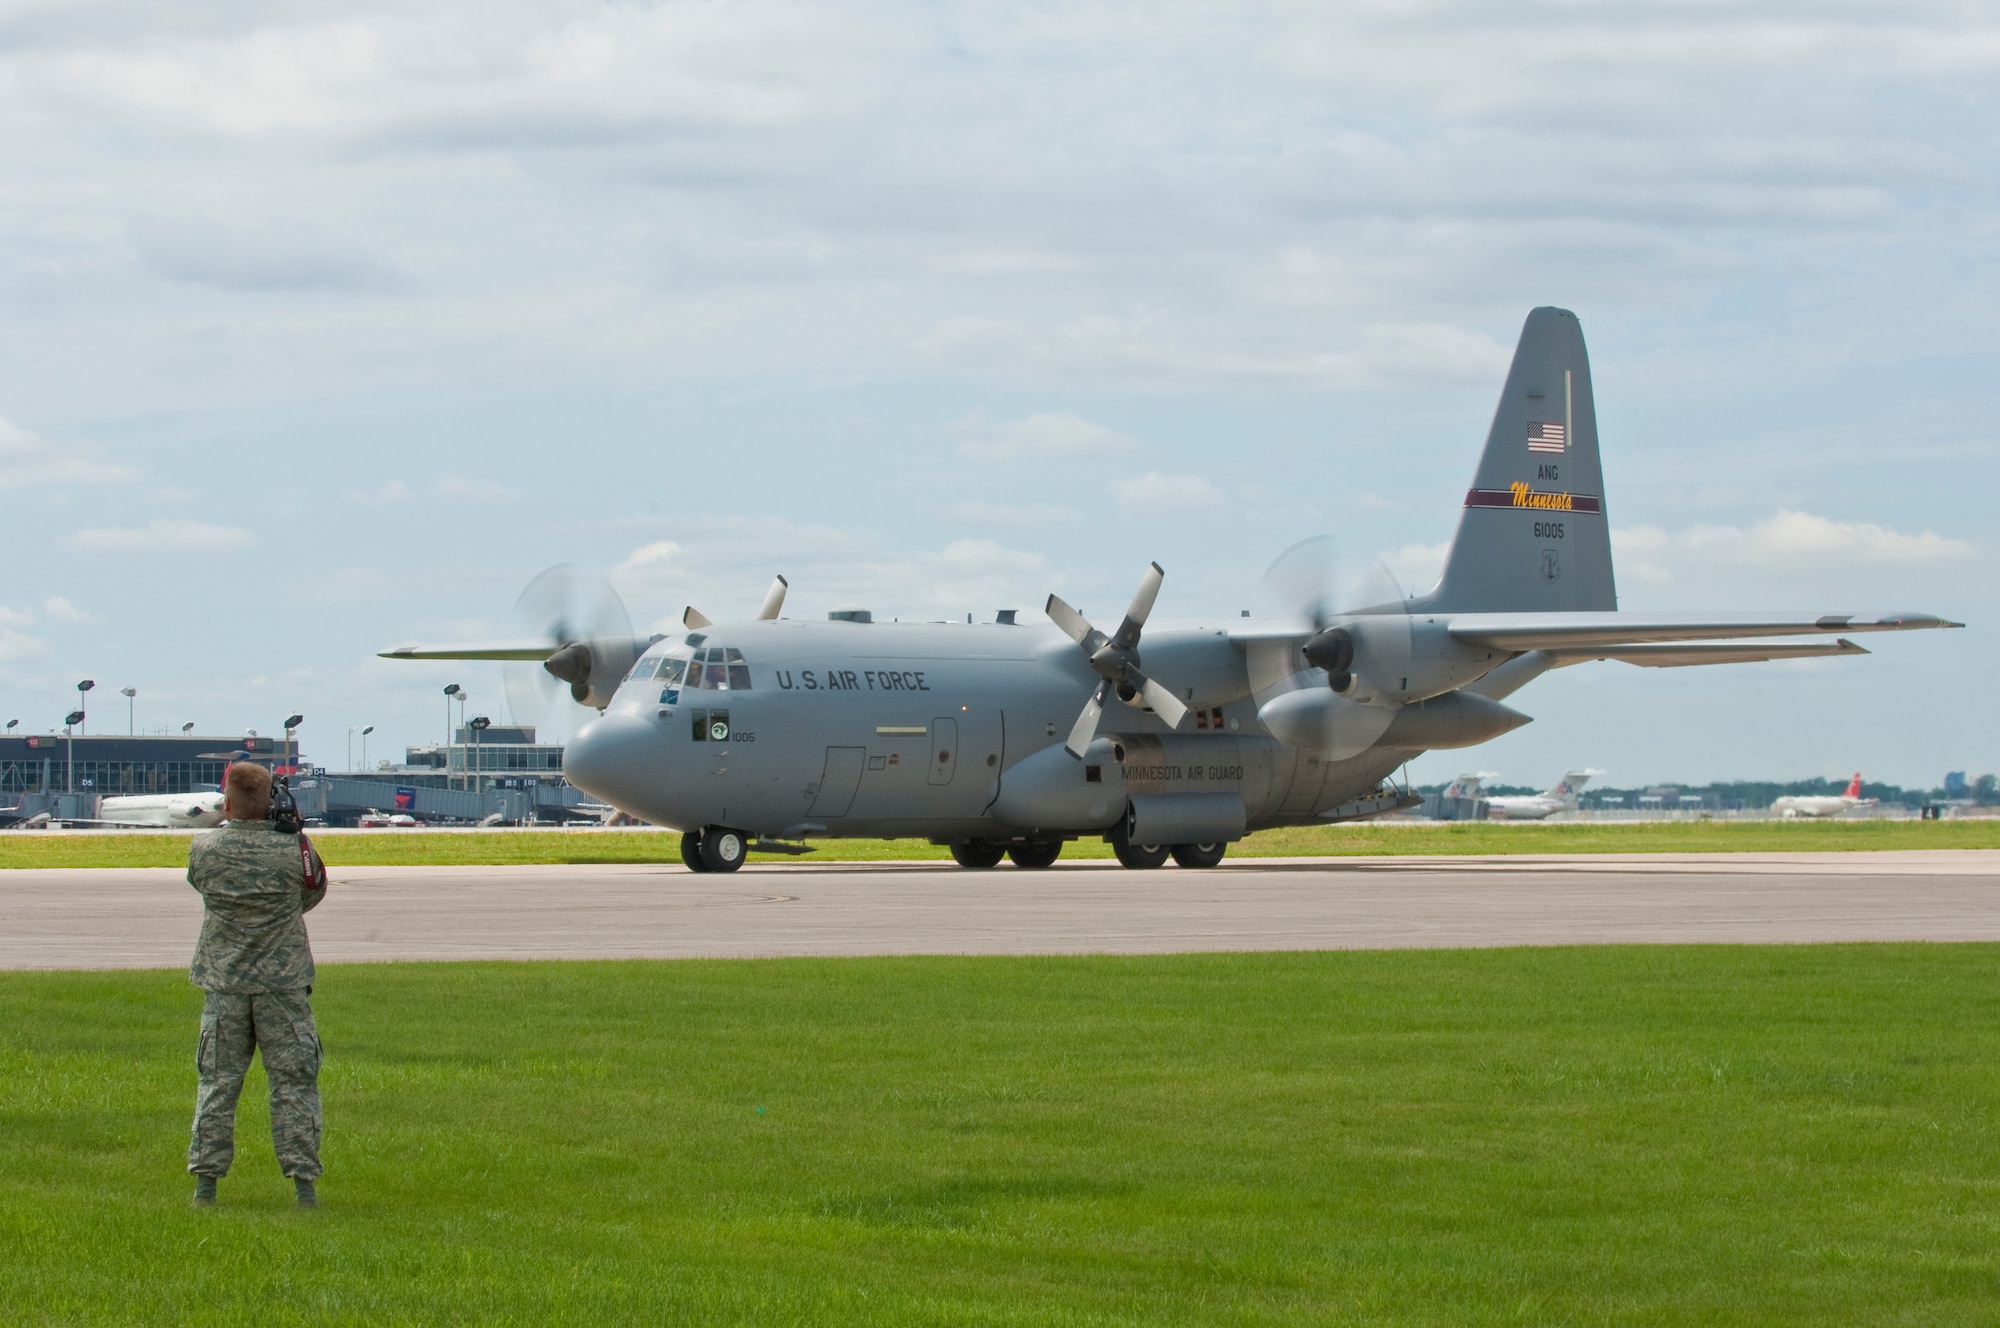 A  C-130 "Hercules" taxis into position for recovery at the Minneapolis-St. Paul International airport on July 11, 2010 after returning from a tour in Afghanistan. The military cargo aircraft and about twenty Airmen are the first in a series of returns during July for the 133rd Airlift Wing in 2010. USAF official photo by Senior Master Sgt. Mark Moss